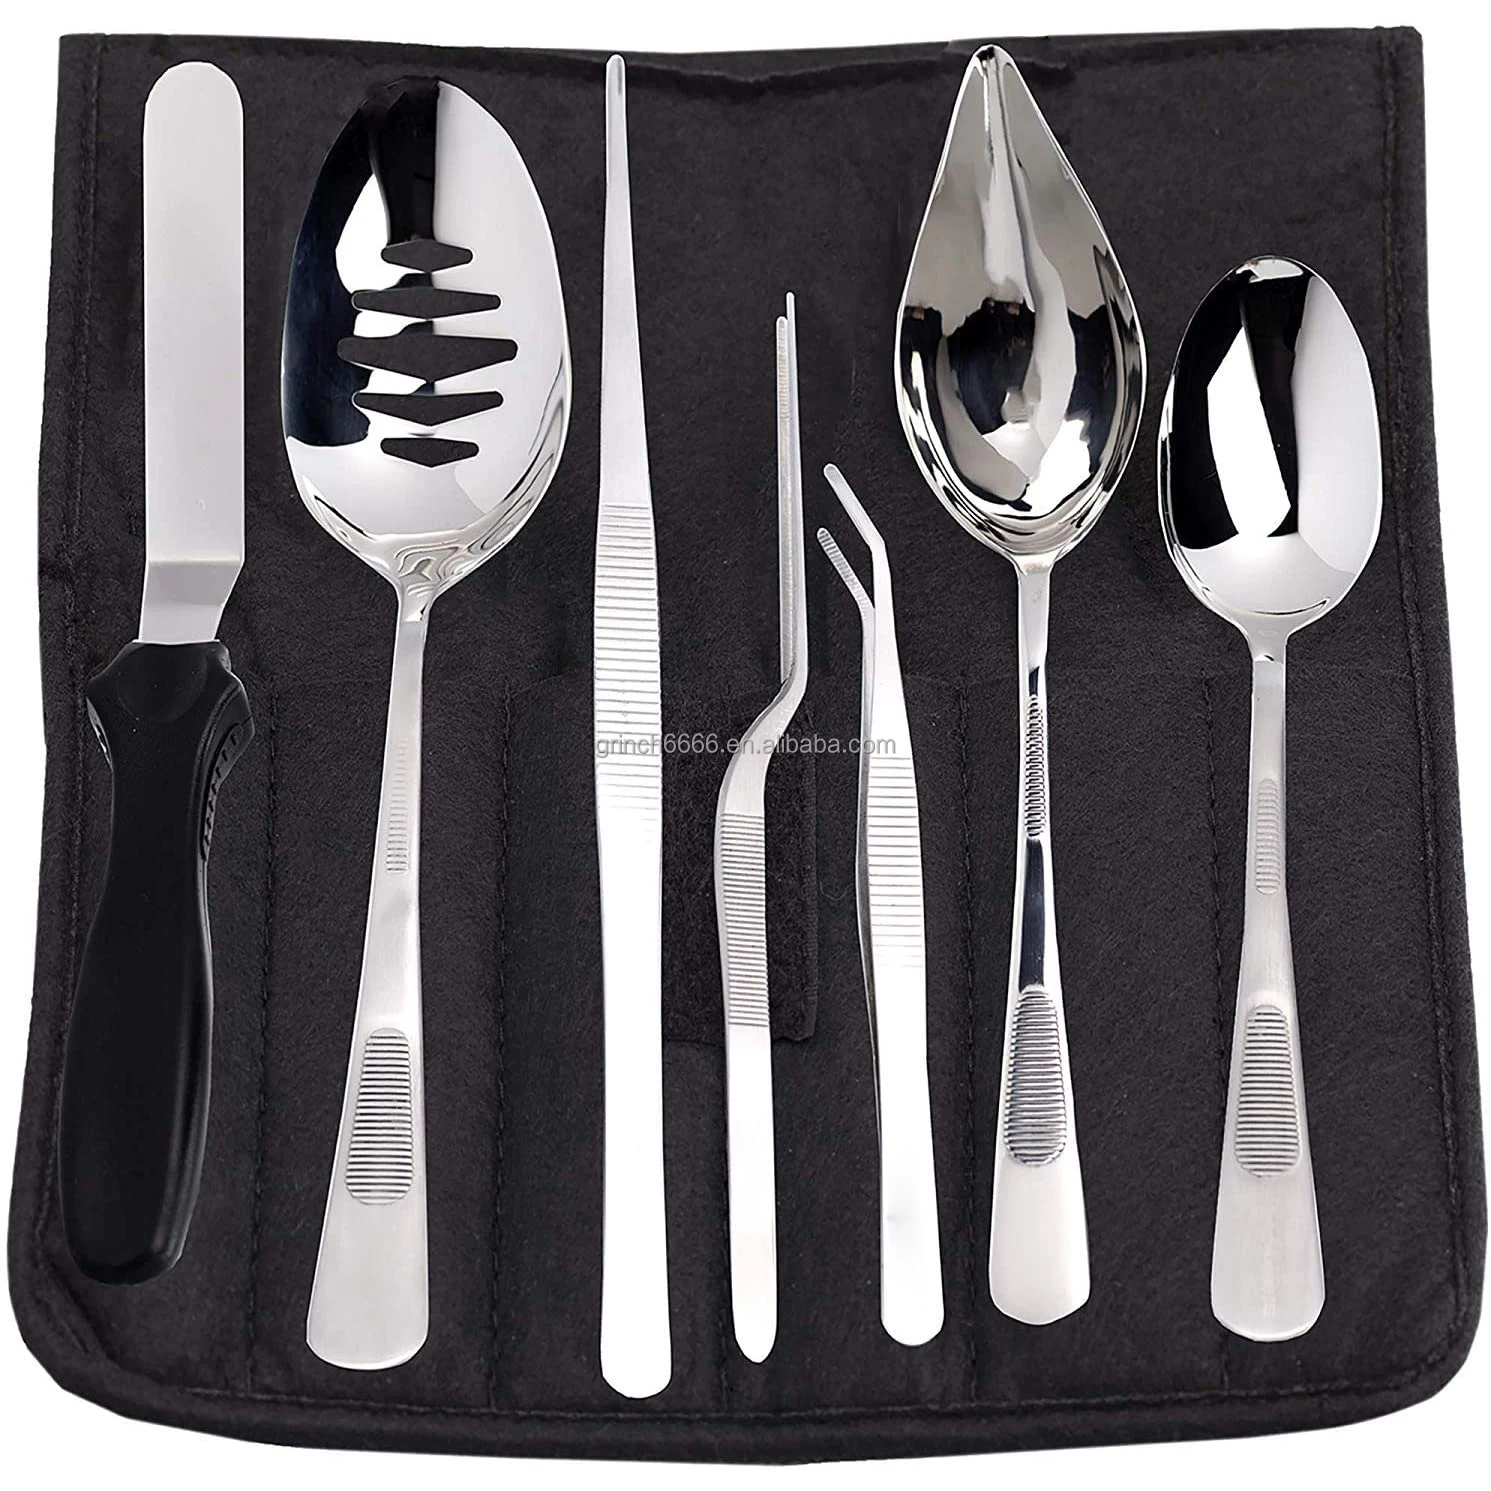 CREATIVECHEF Professional Chef Plating Kit, 7 Piece Culinary Plating Set,  Black, Stainless Steel (7 Piece, Black)